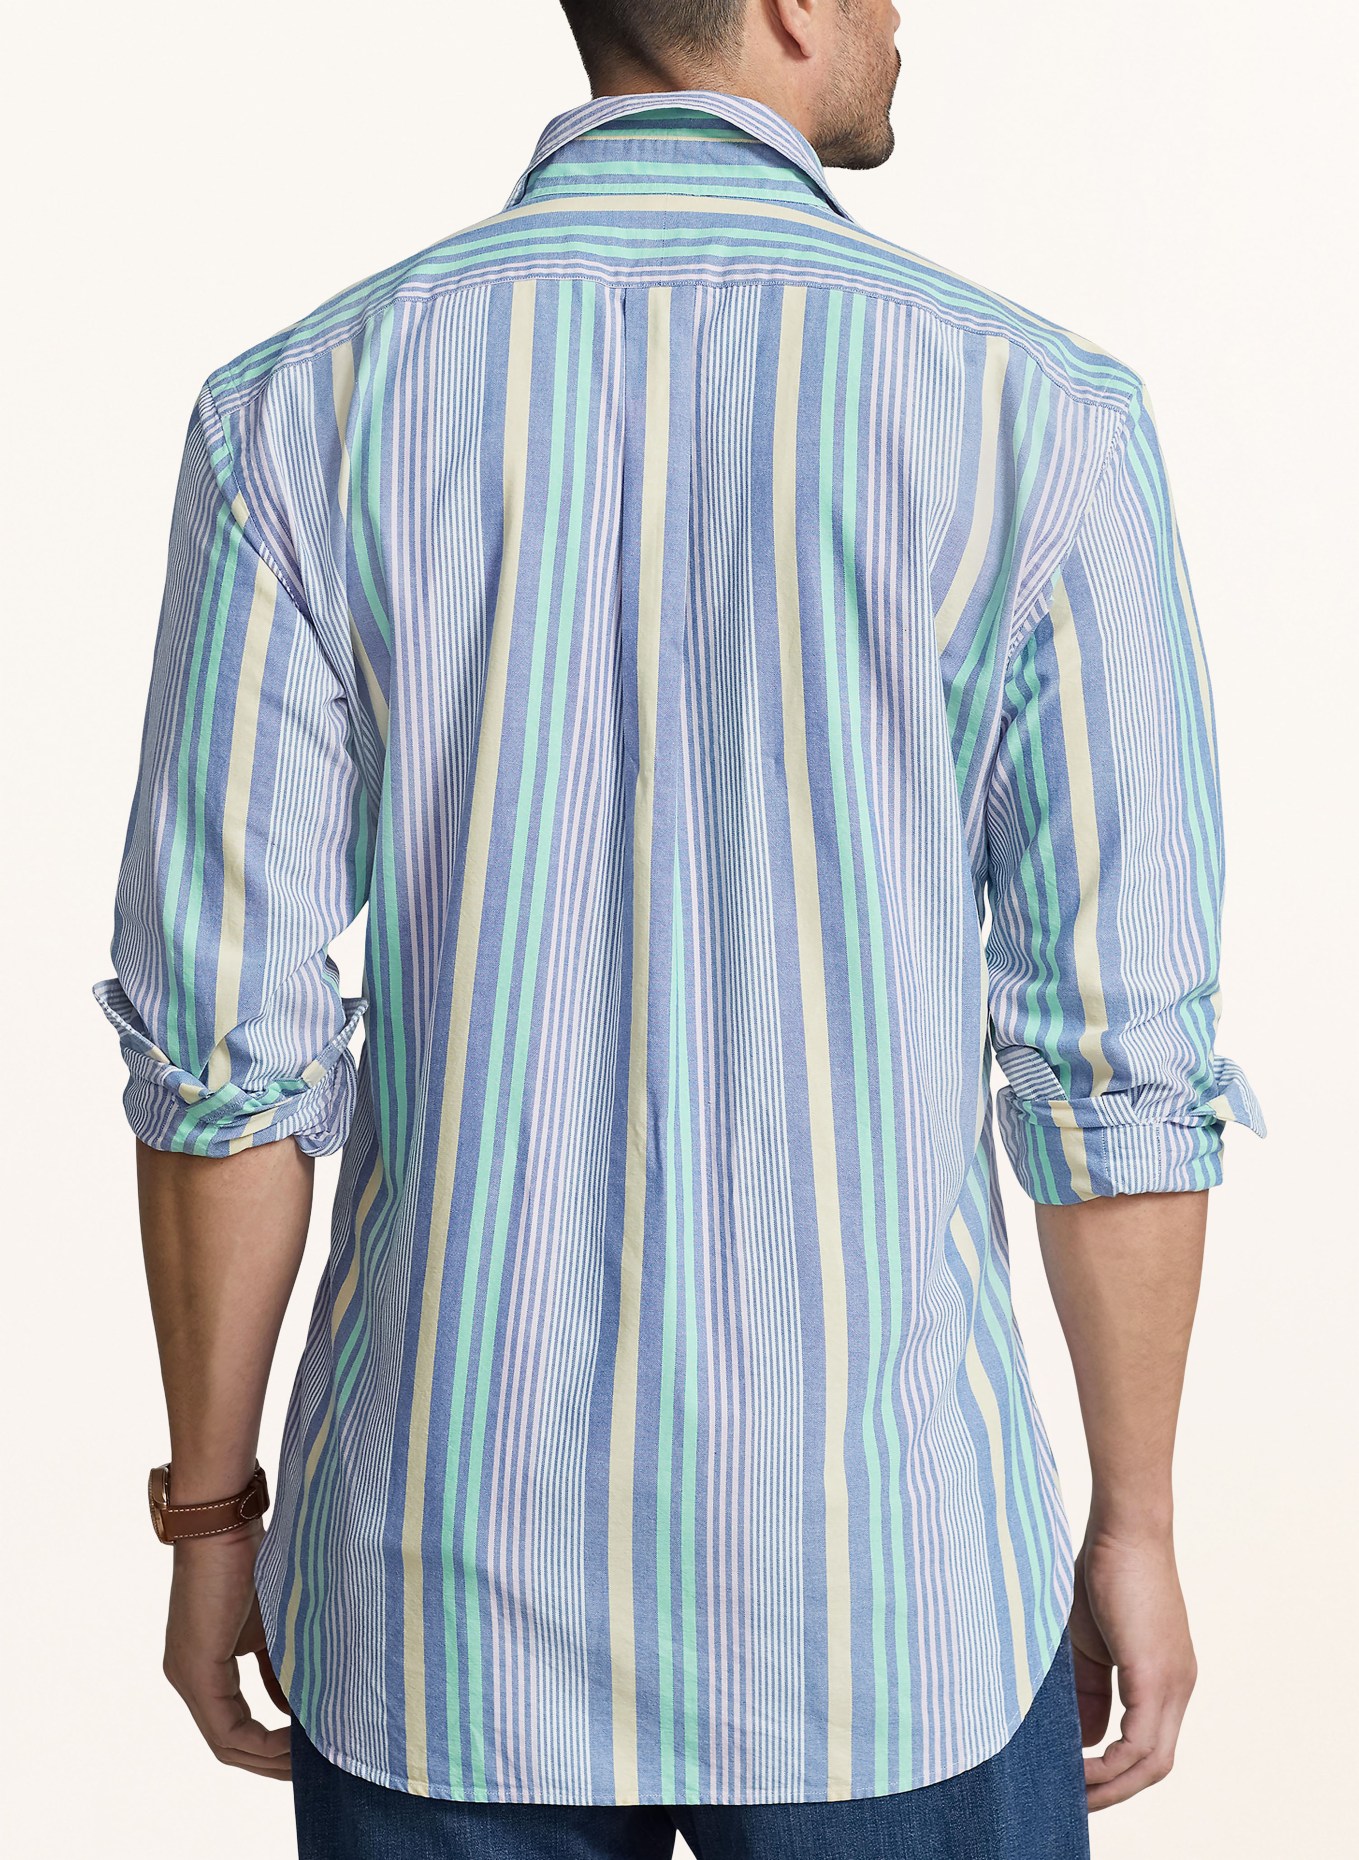 POLO RALPH LAUREN Big & Tall Shirt regular fit, Color: BLUE/ WHITE/ TURQUOISE (Image 3)